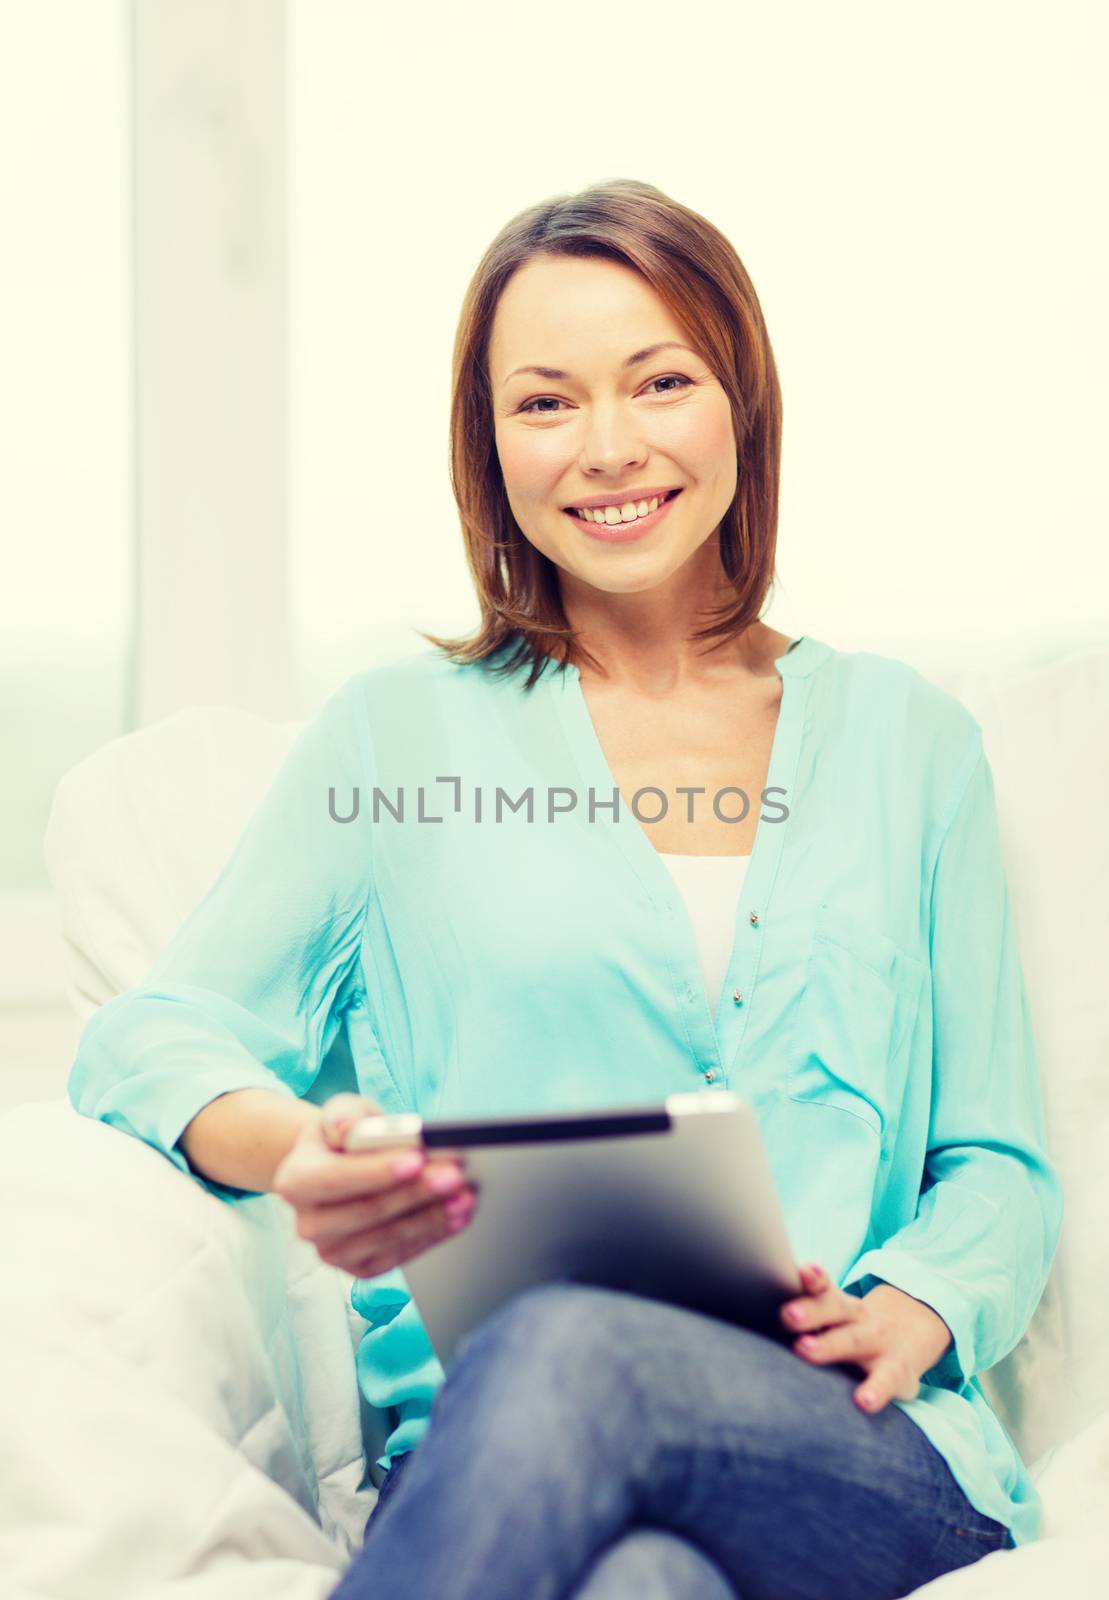 home, technology and internet concept - smiling woman sitting on the couch with tablet pc at home